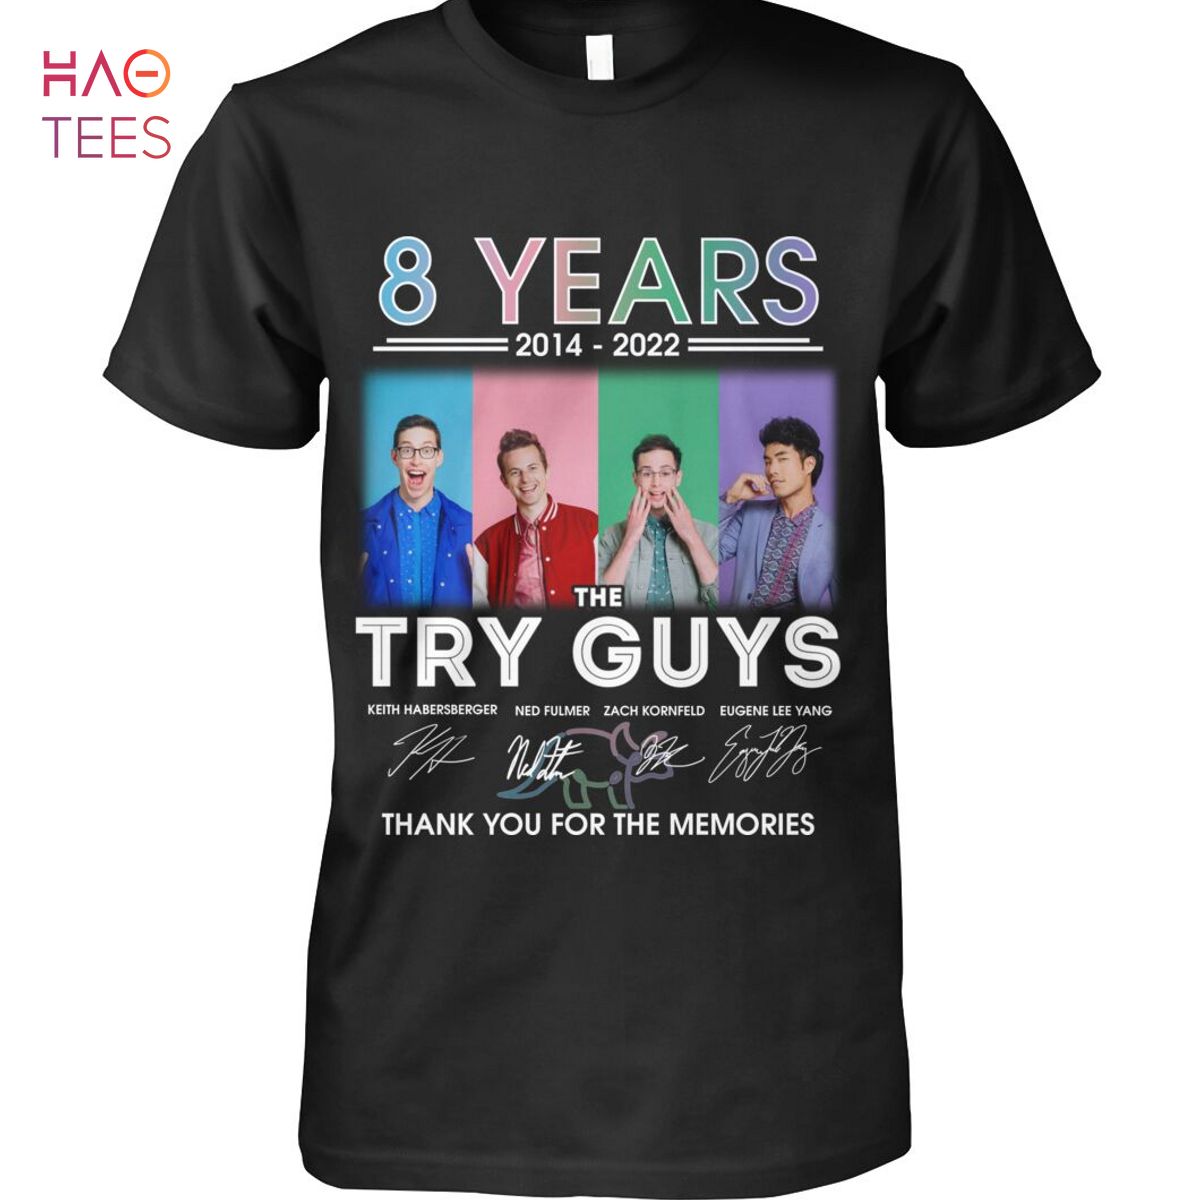 8 Years 2014-2022 The Try Guys Thank You For The Memories Shirt